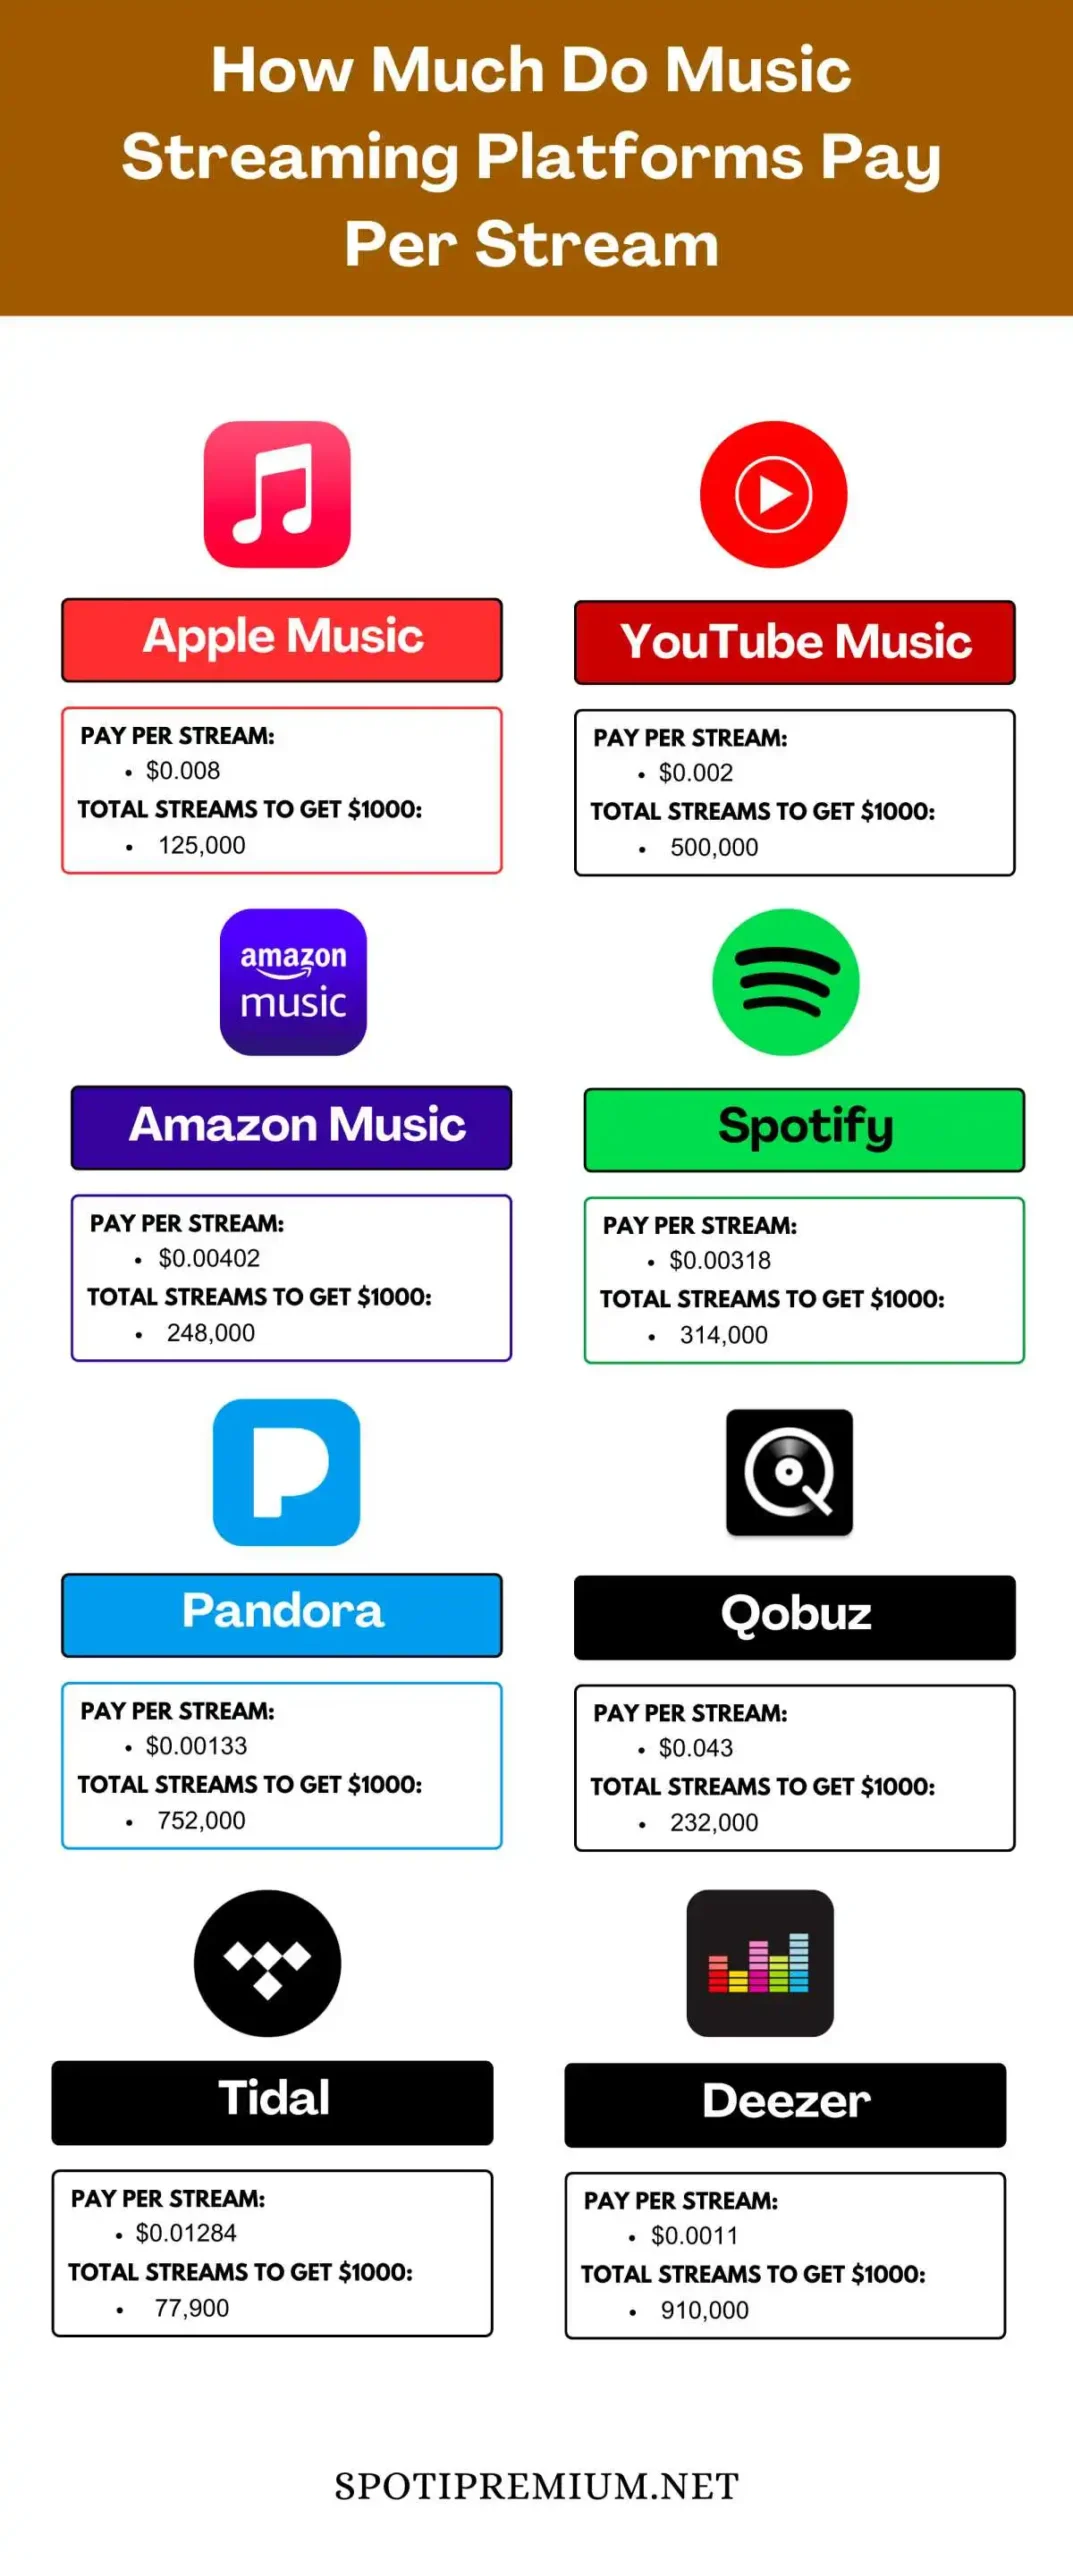 How Much Do Music Streaming Platforms Pay Per Stream